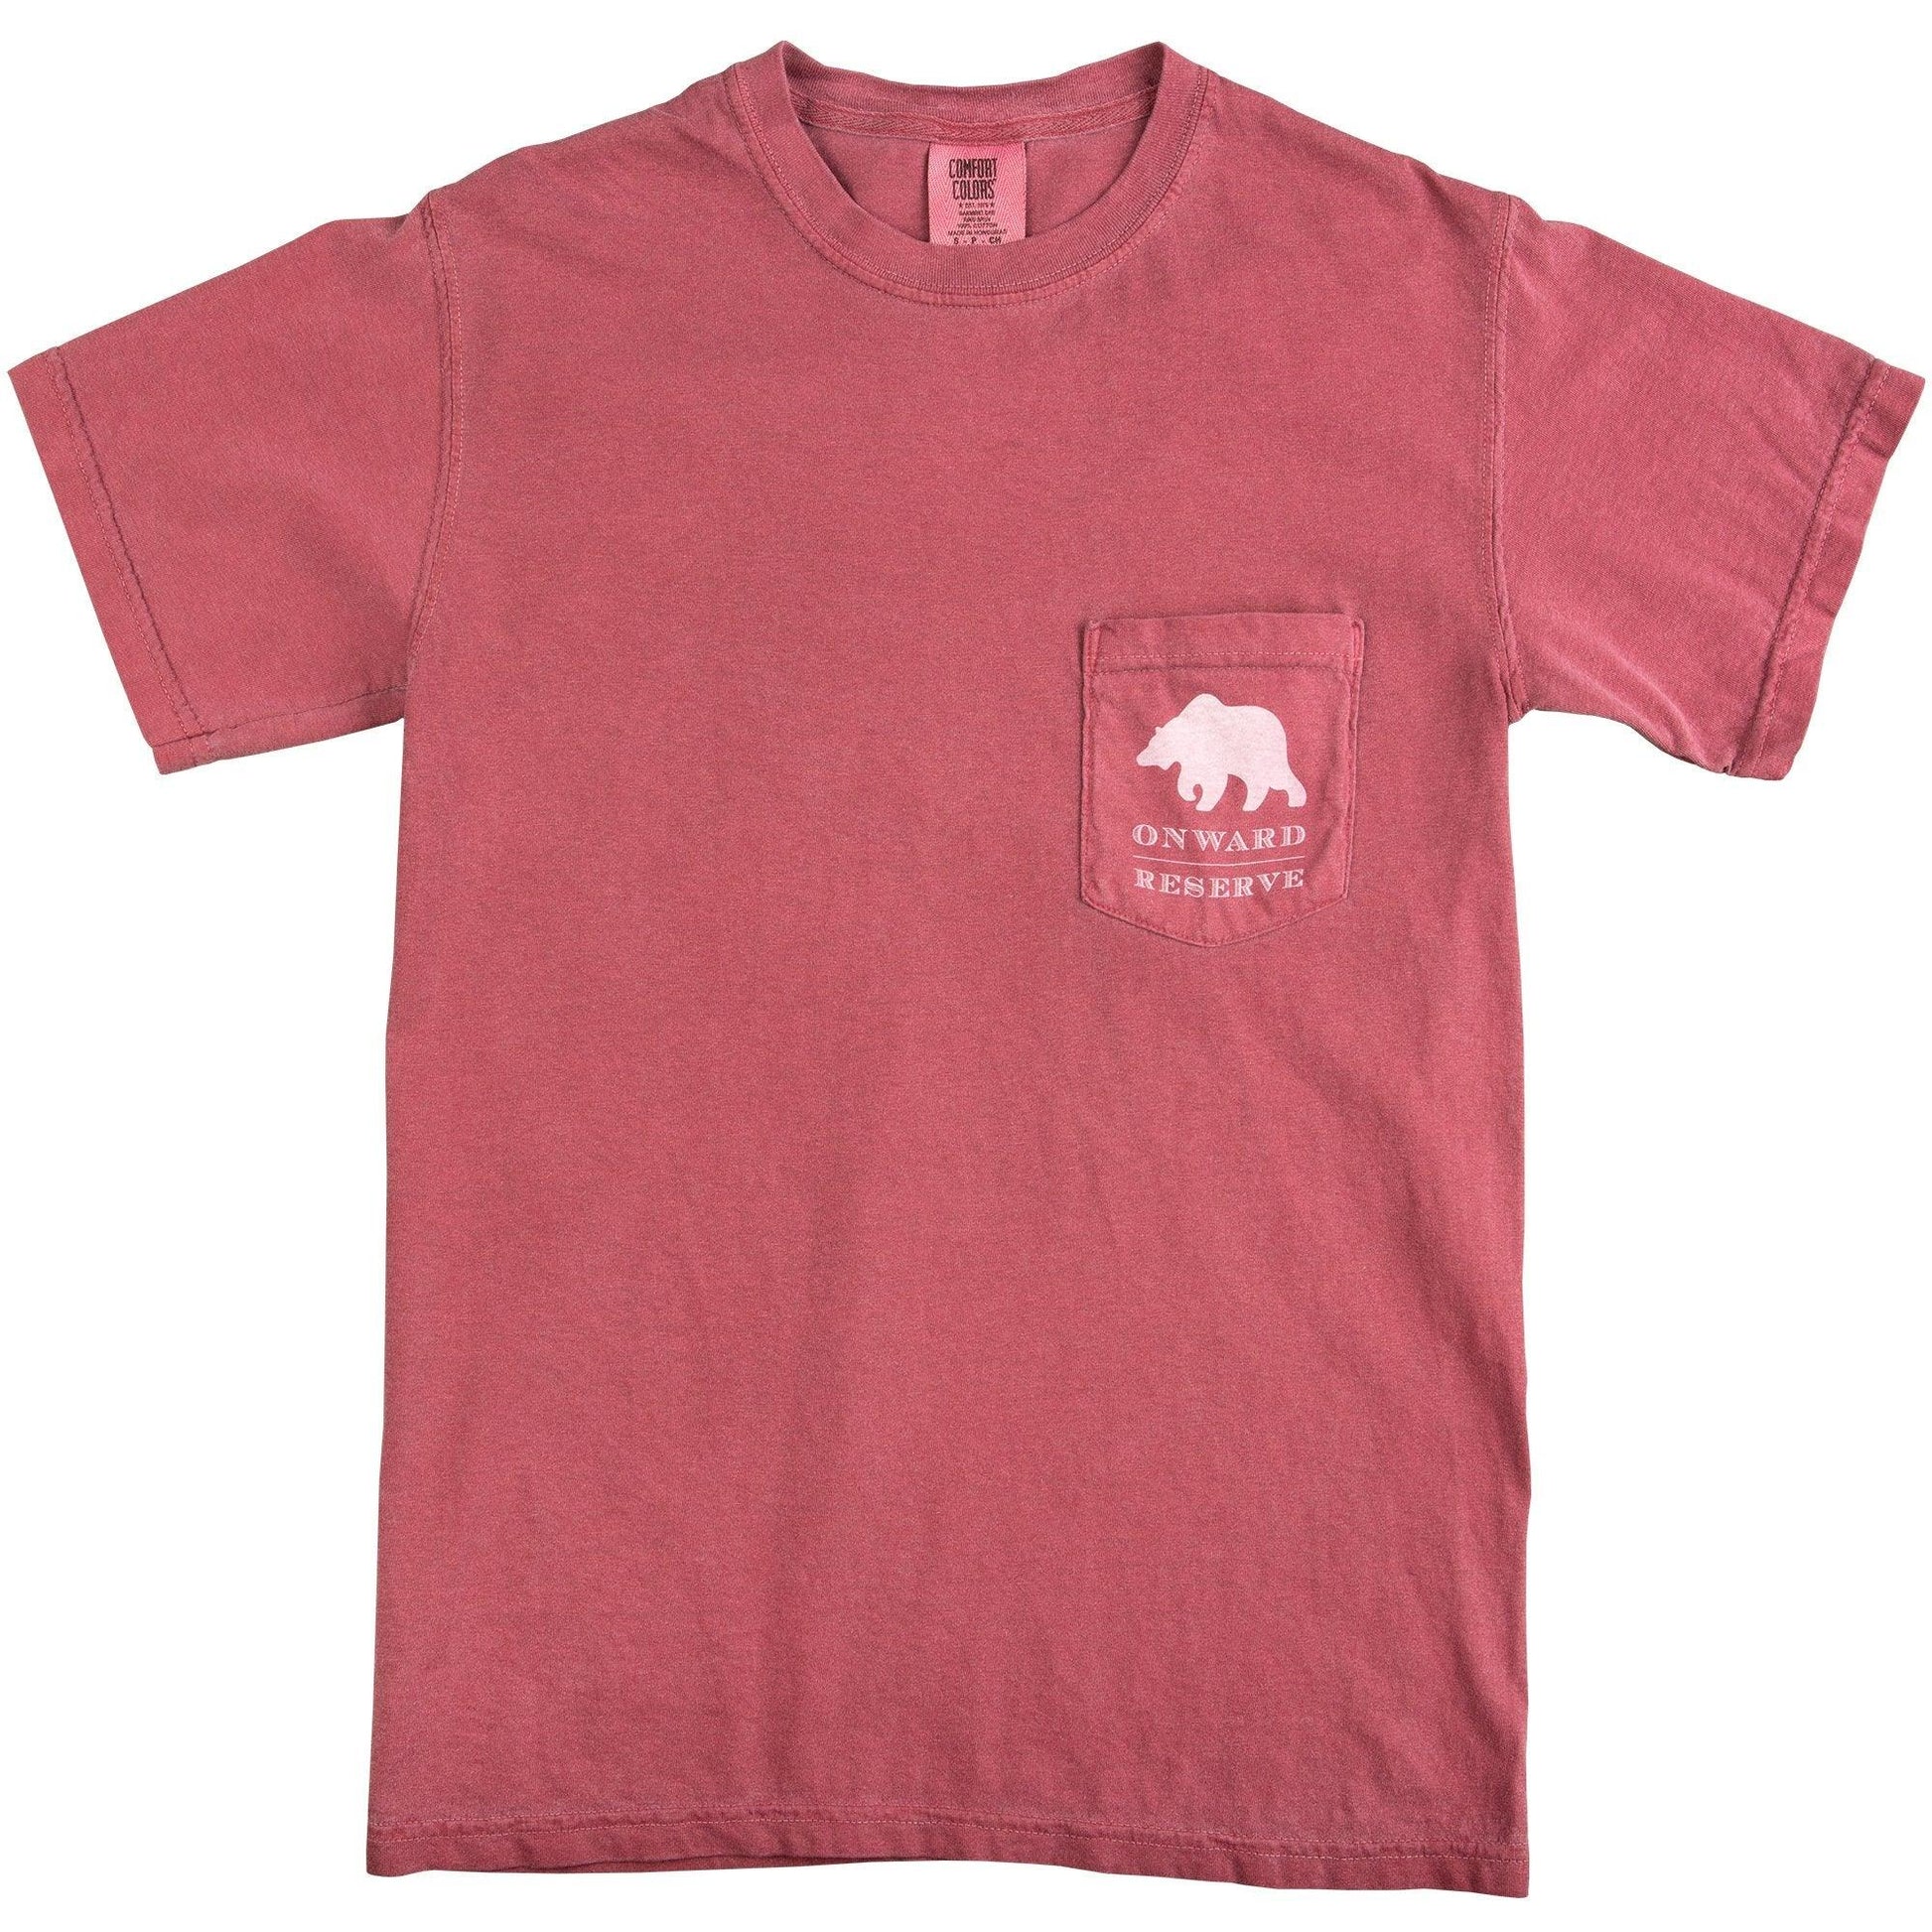 Rustic Bear Short Sleeve tee - Washed Red - Onward Reserve